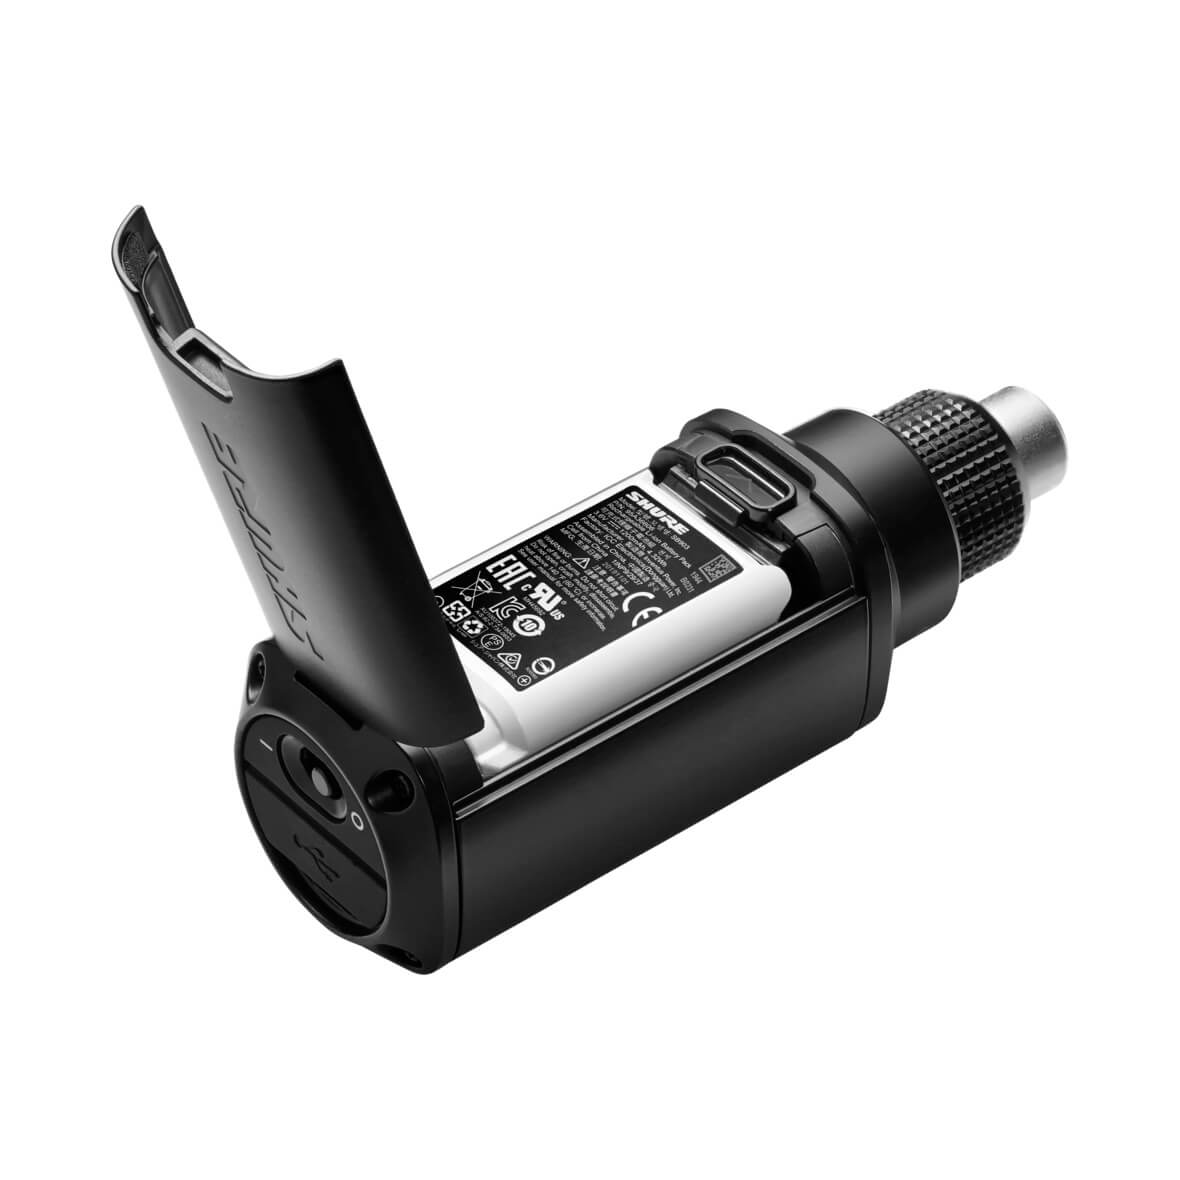 Shure SLXD3 plug-on wireless transmitter, shown with optional rechargeable battery